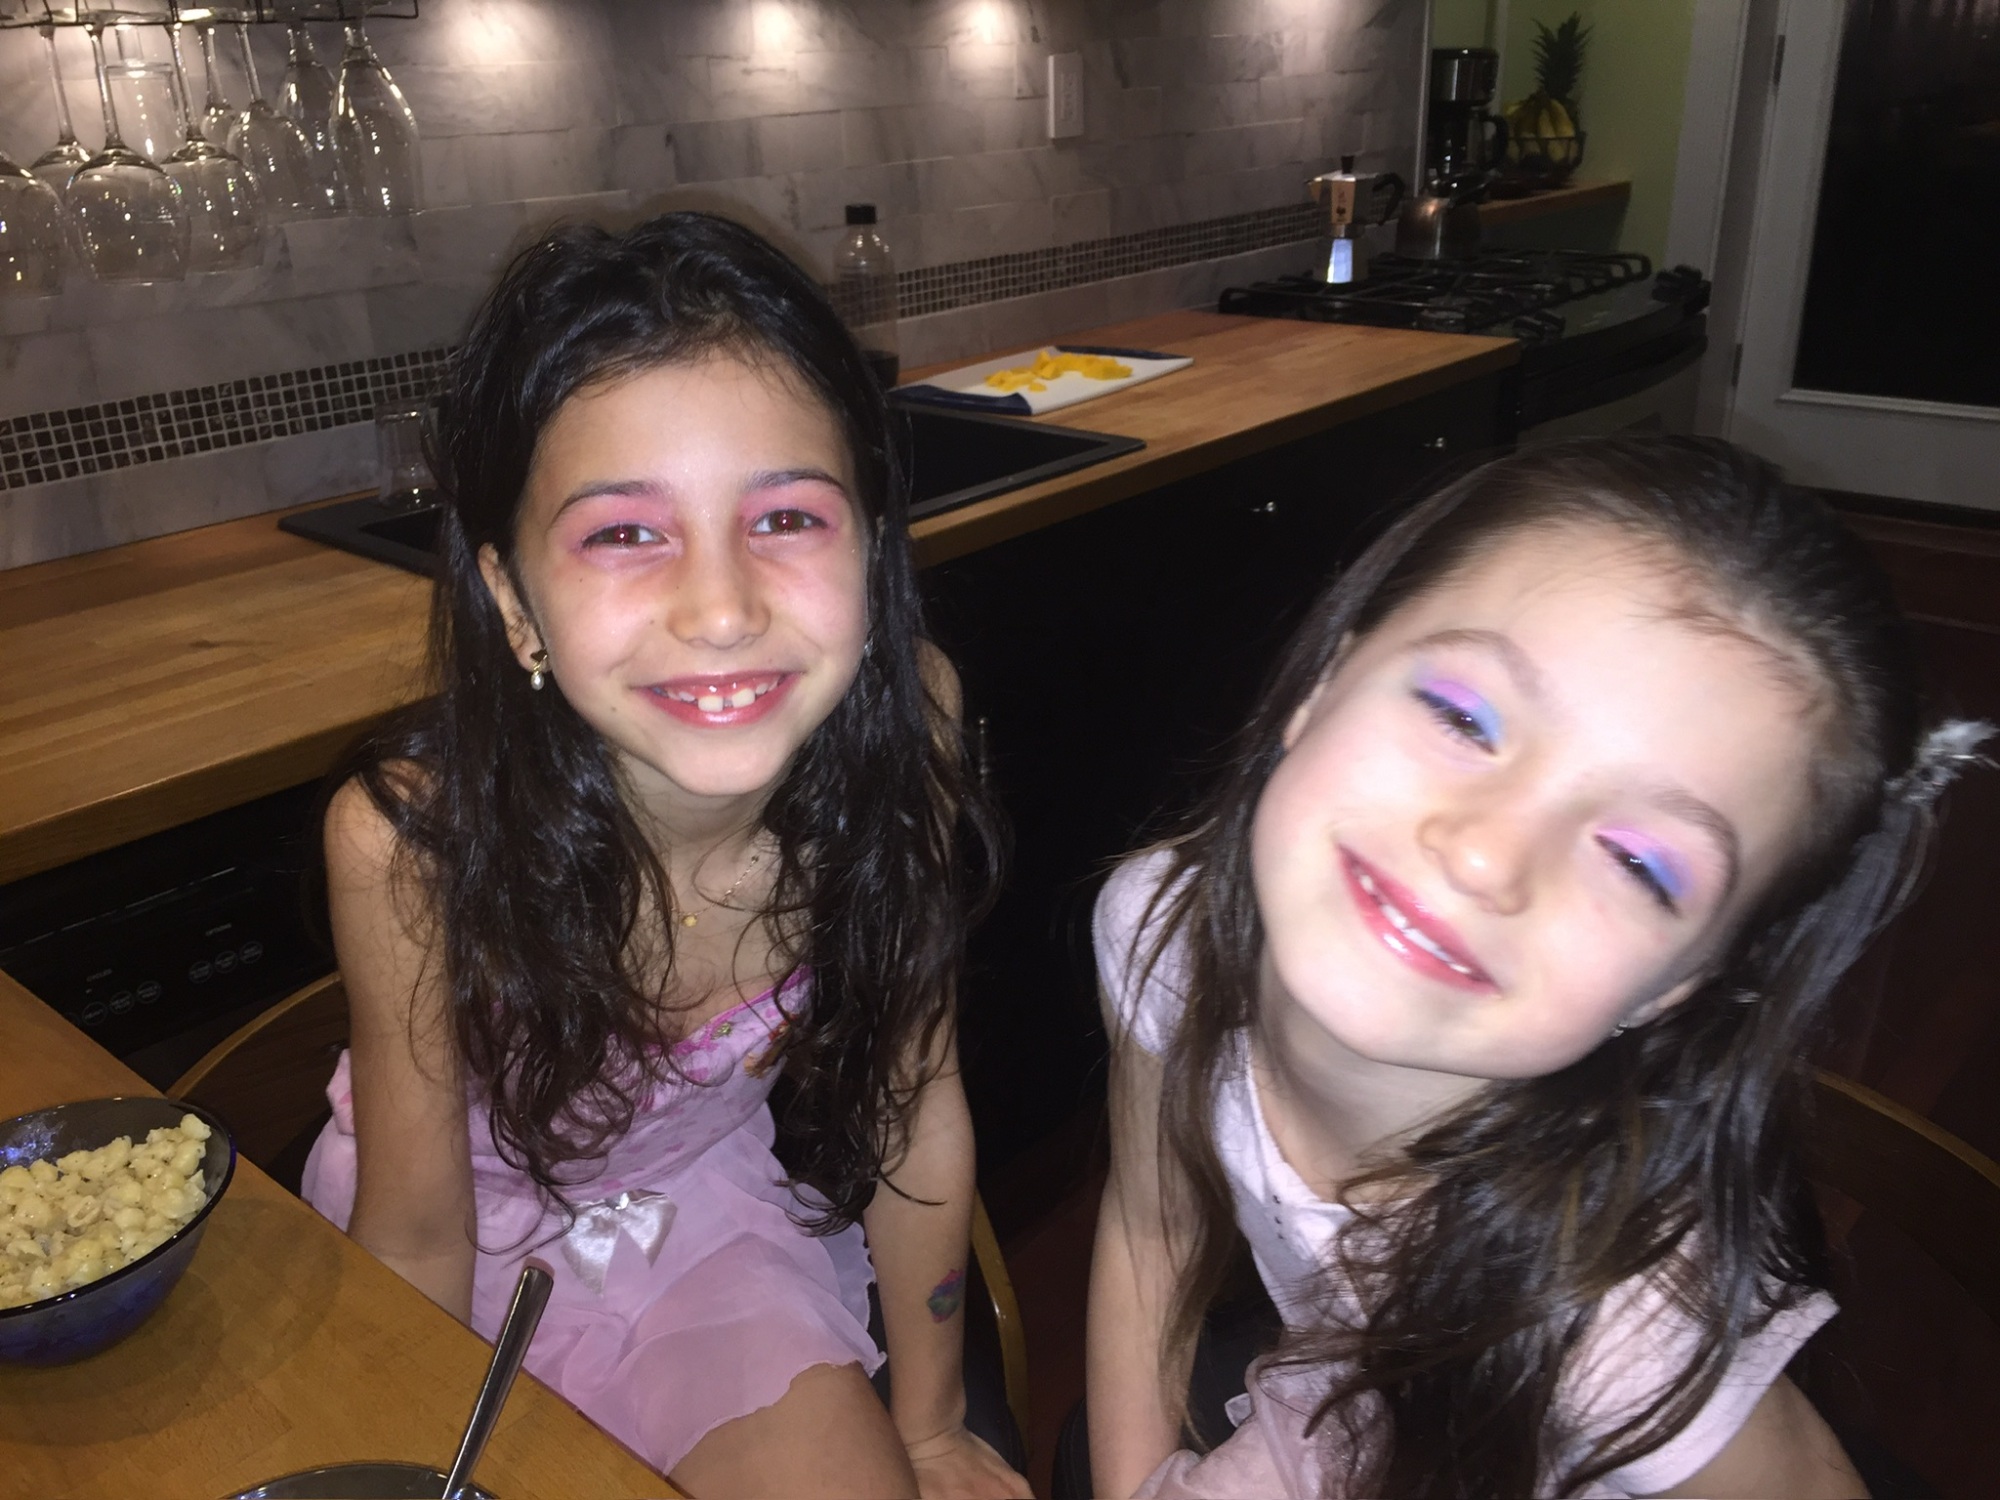 Two young girls with colorful makeup smiling at a kitchen counter with a bowl of popcorn nearby.